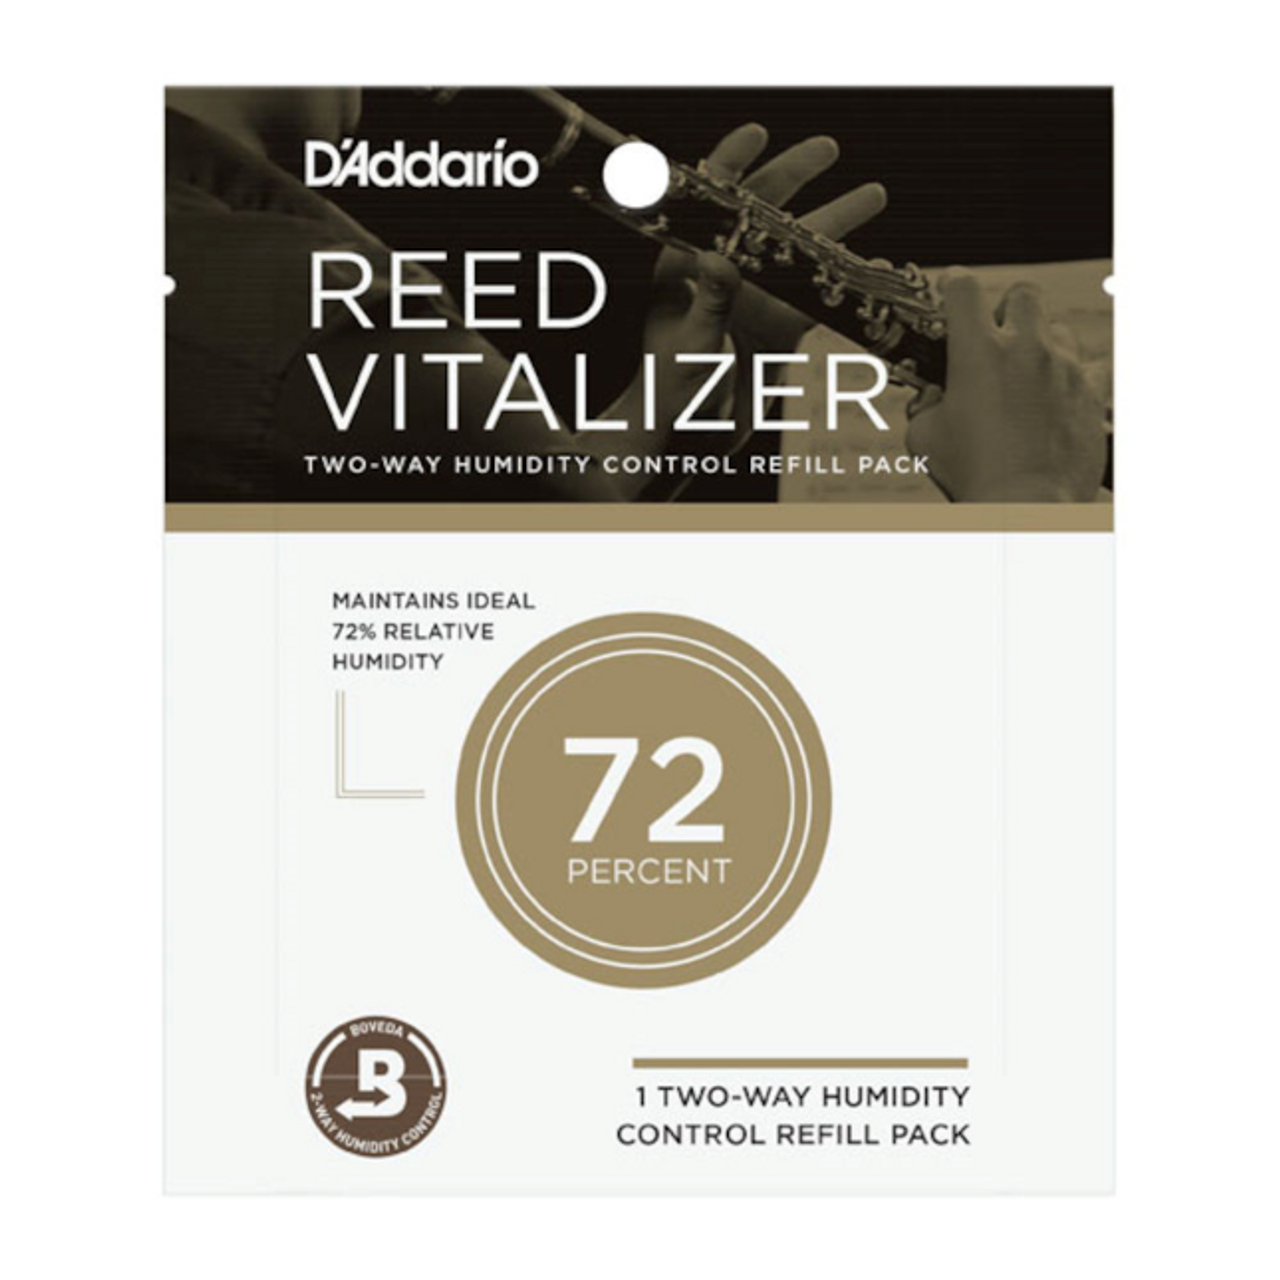 Reed Vitalizer Humidity Control - Single Refill Pack, 73% Humidity